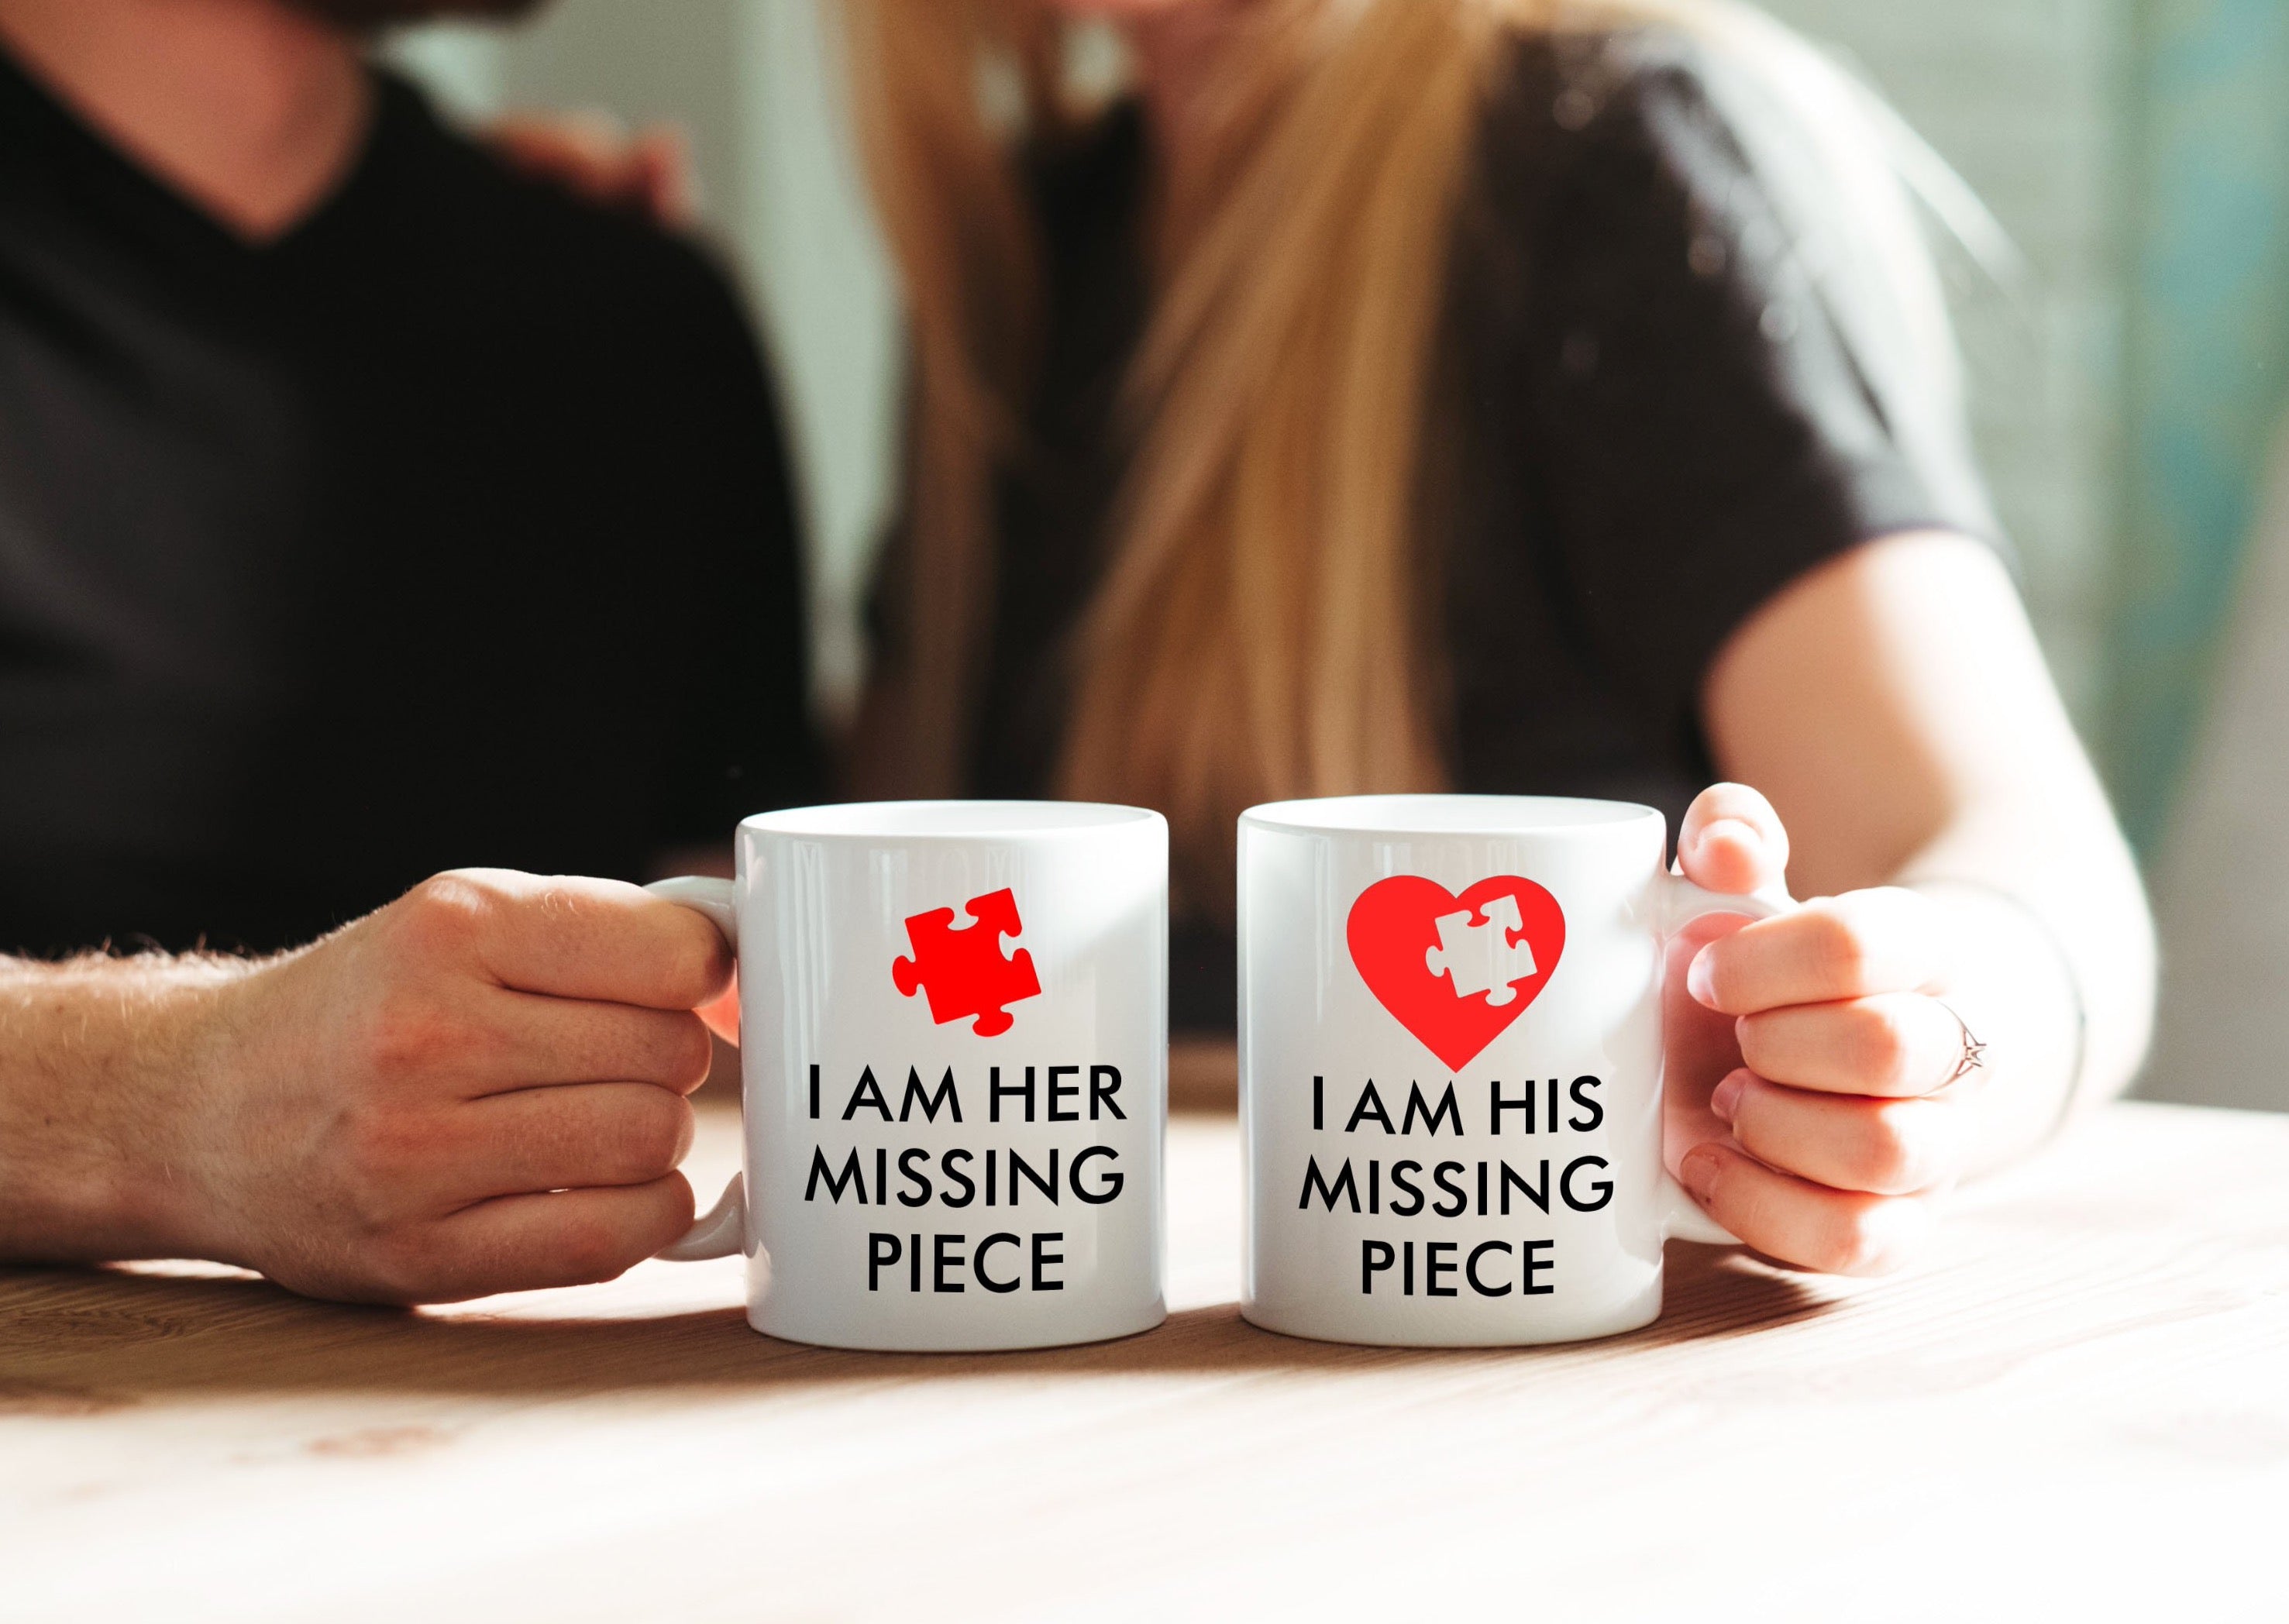 His and Hers Mugs - Etsy